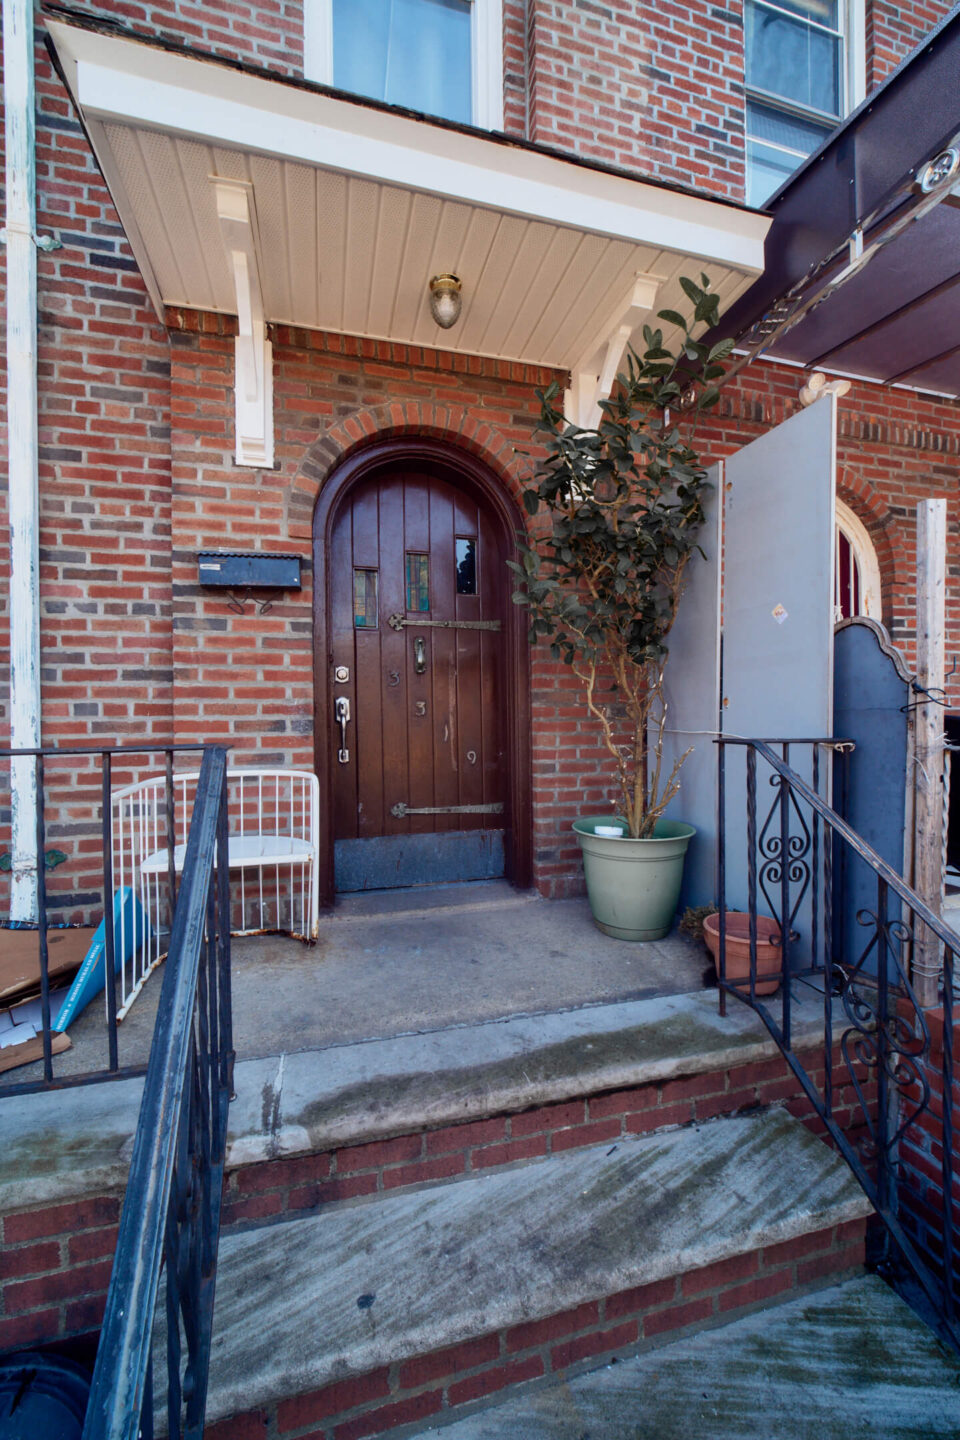 33-19 69th Street Woodside, New York - Real Estate Photography - AirBnb Listing